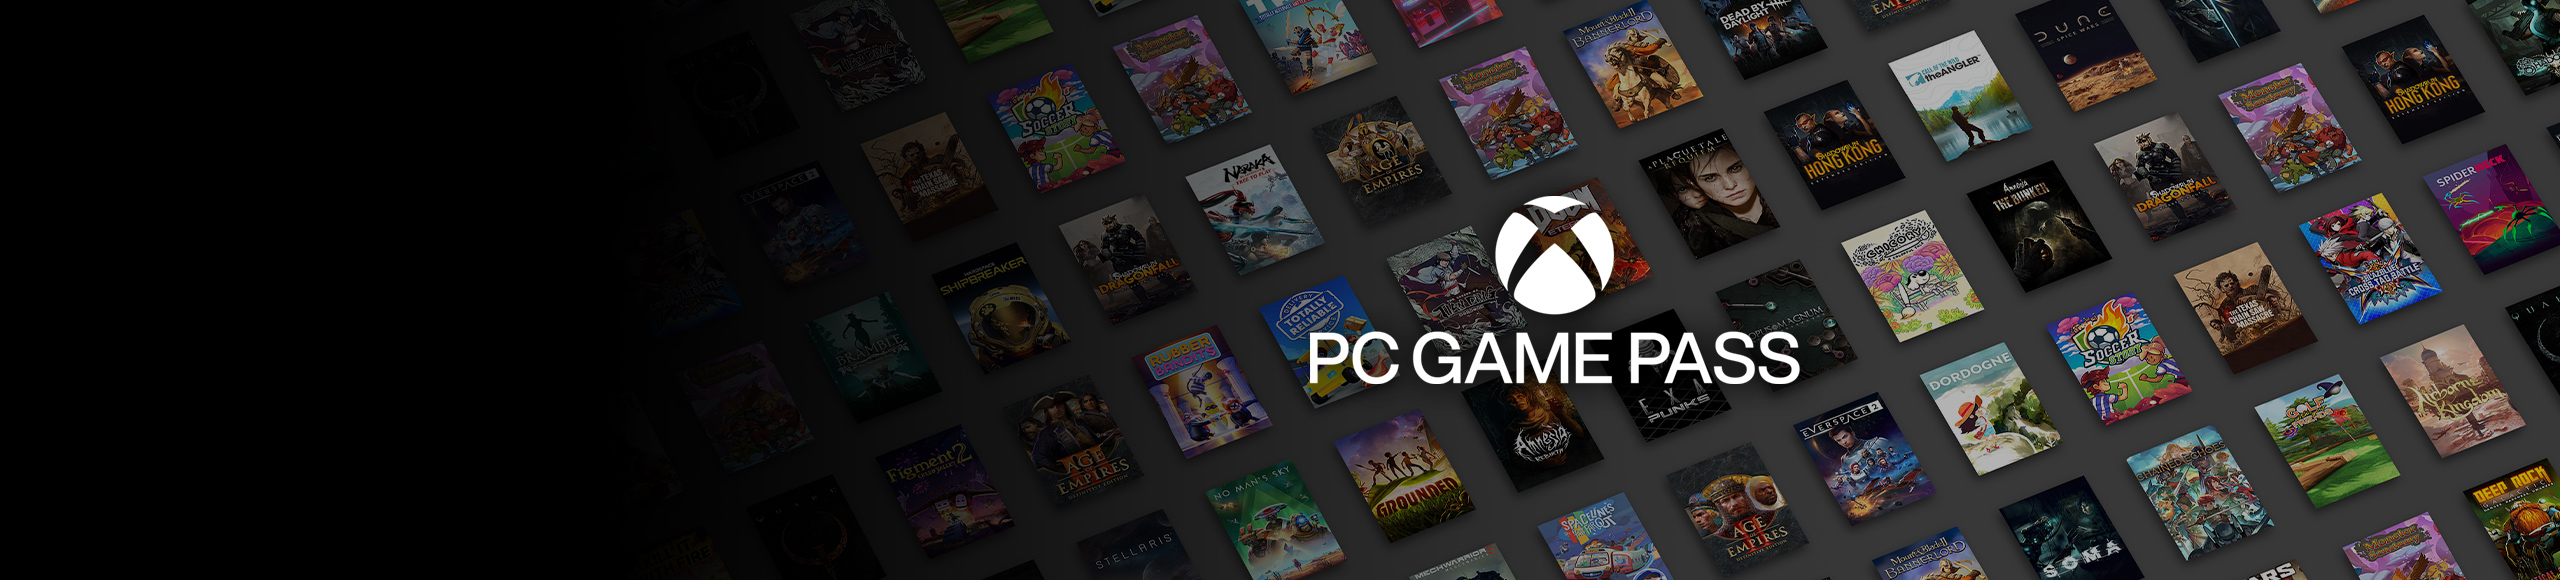 Nvidia Bundles 3 Months of PC Game Pass With GeForce Now Ultimate  Subscription